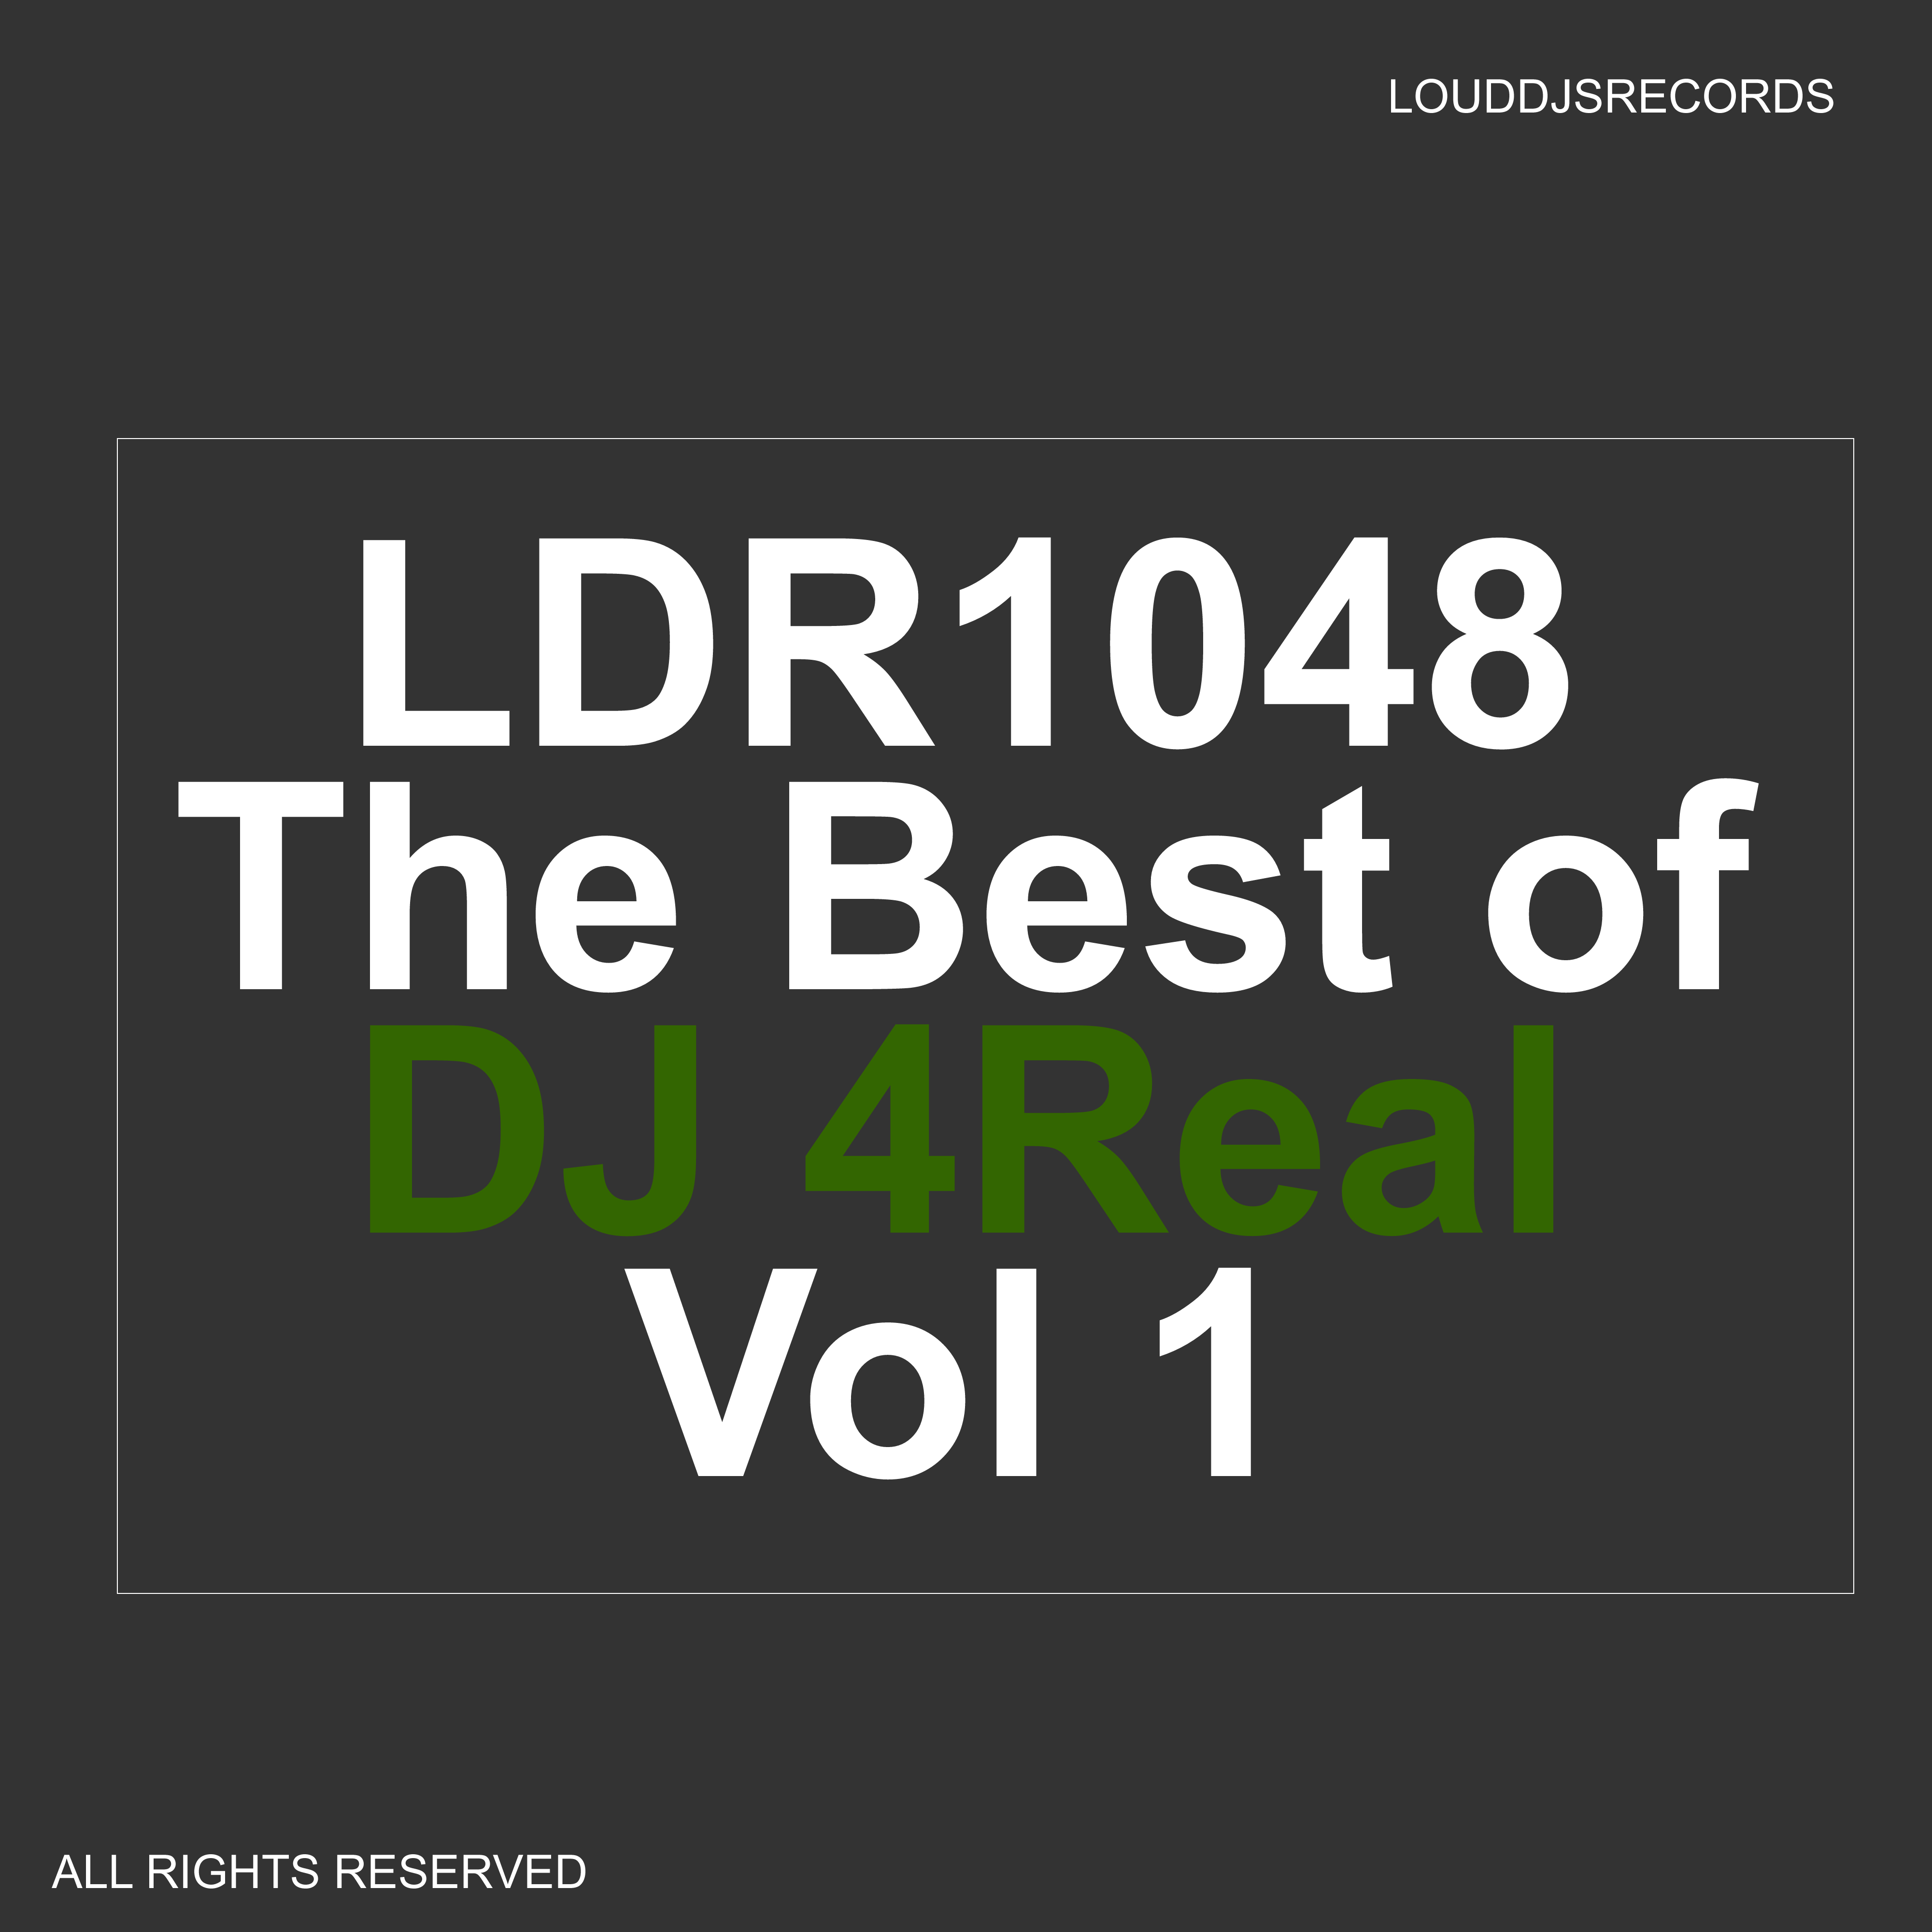 The Best of Dj 4real, Vol. 1